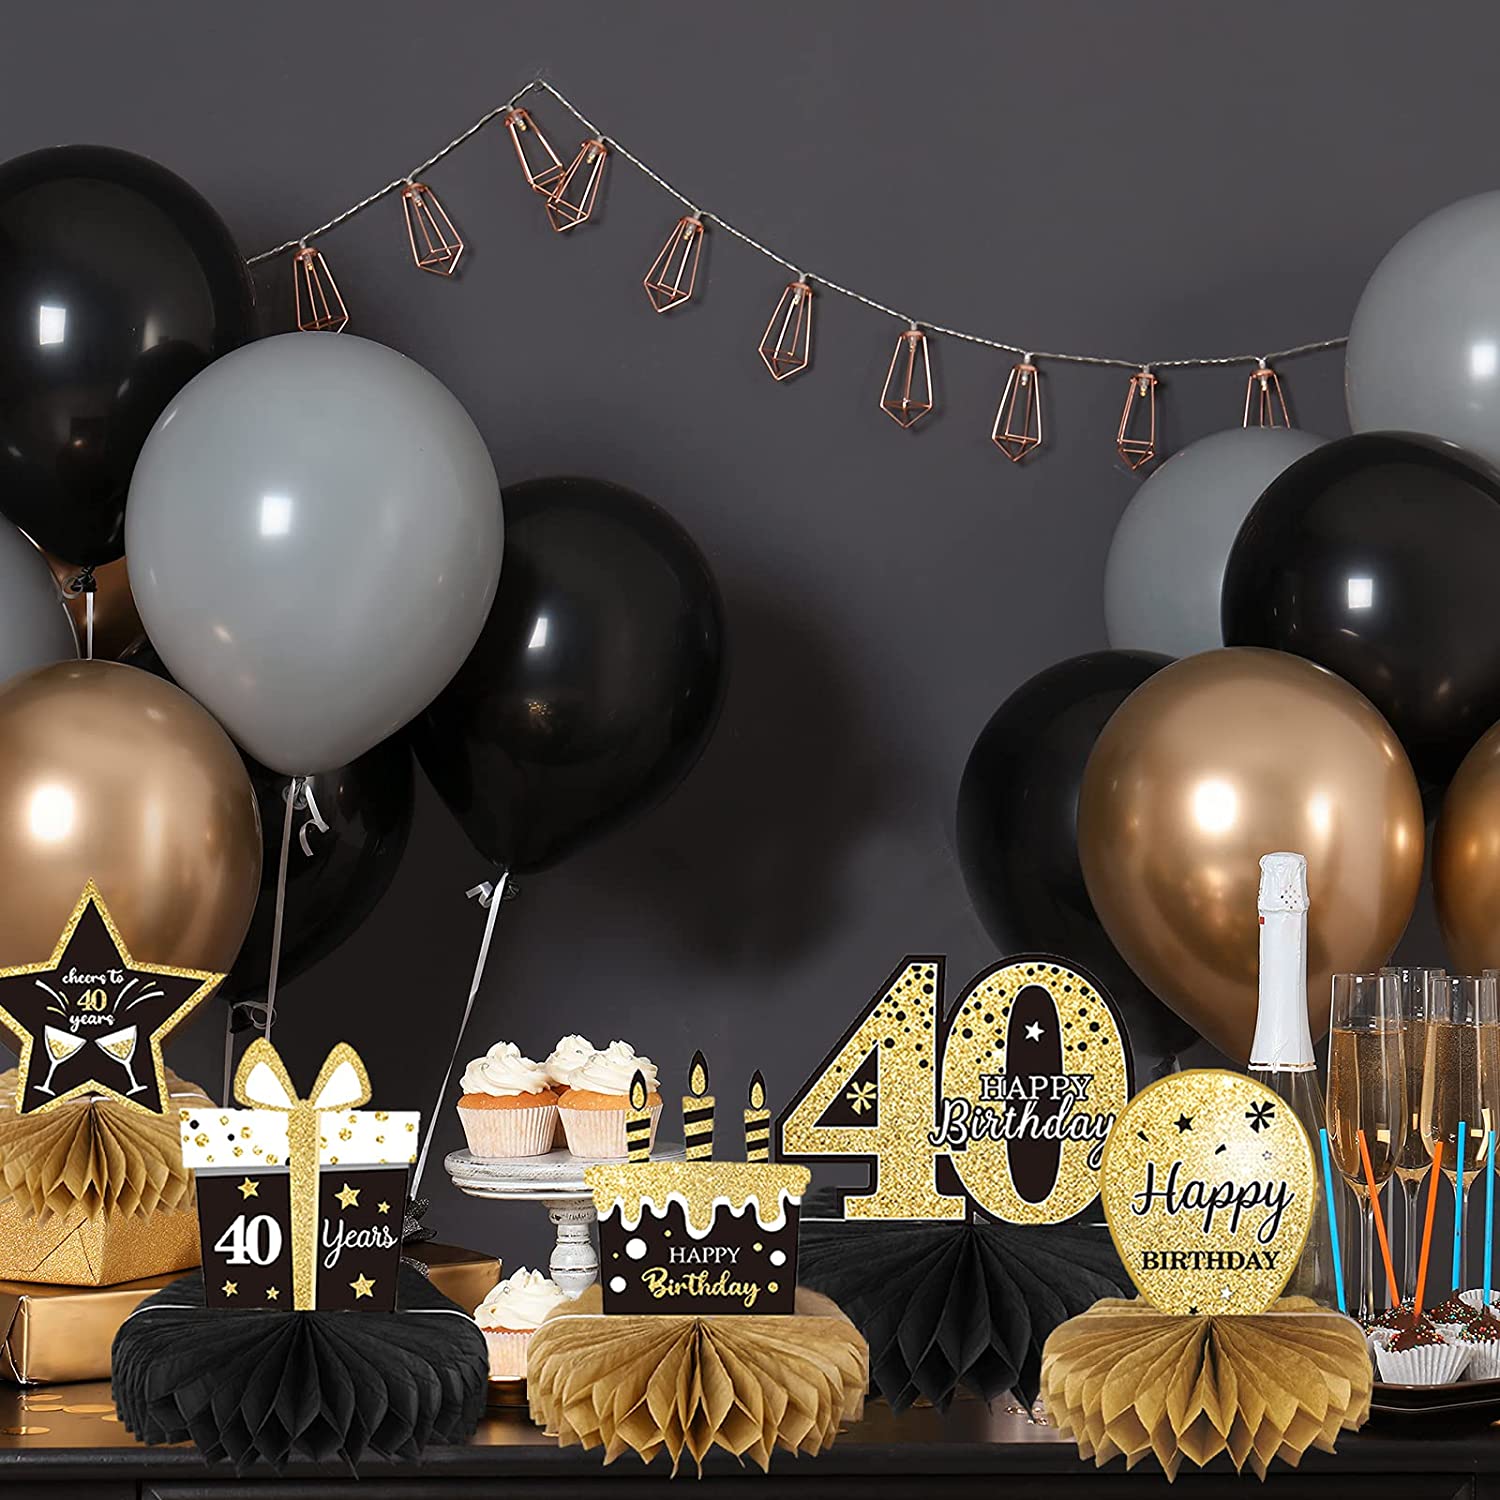 SG Seller]9 Pieces 40th Birthday Decoration 40th Birthday Centerpieces for Tables Decorations Cheers to 40 Years Honeycomb Table Topper for Men and Women Forty Years Birthday Party Decoration Supplies(40th)